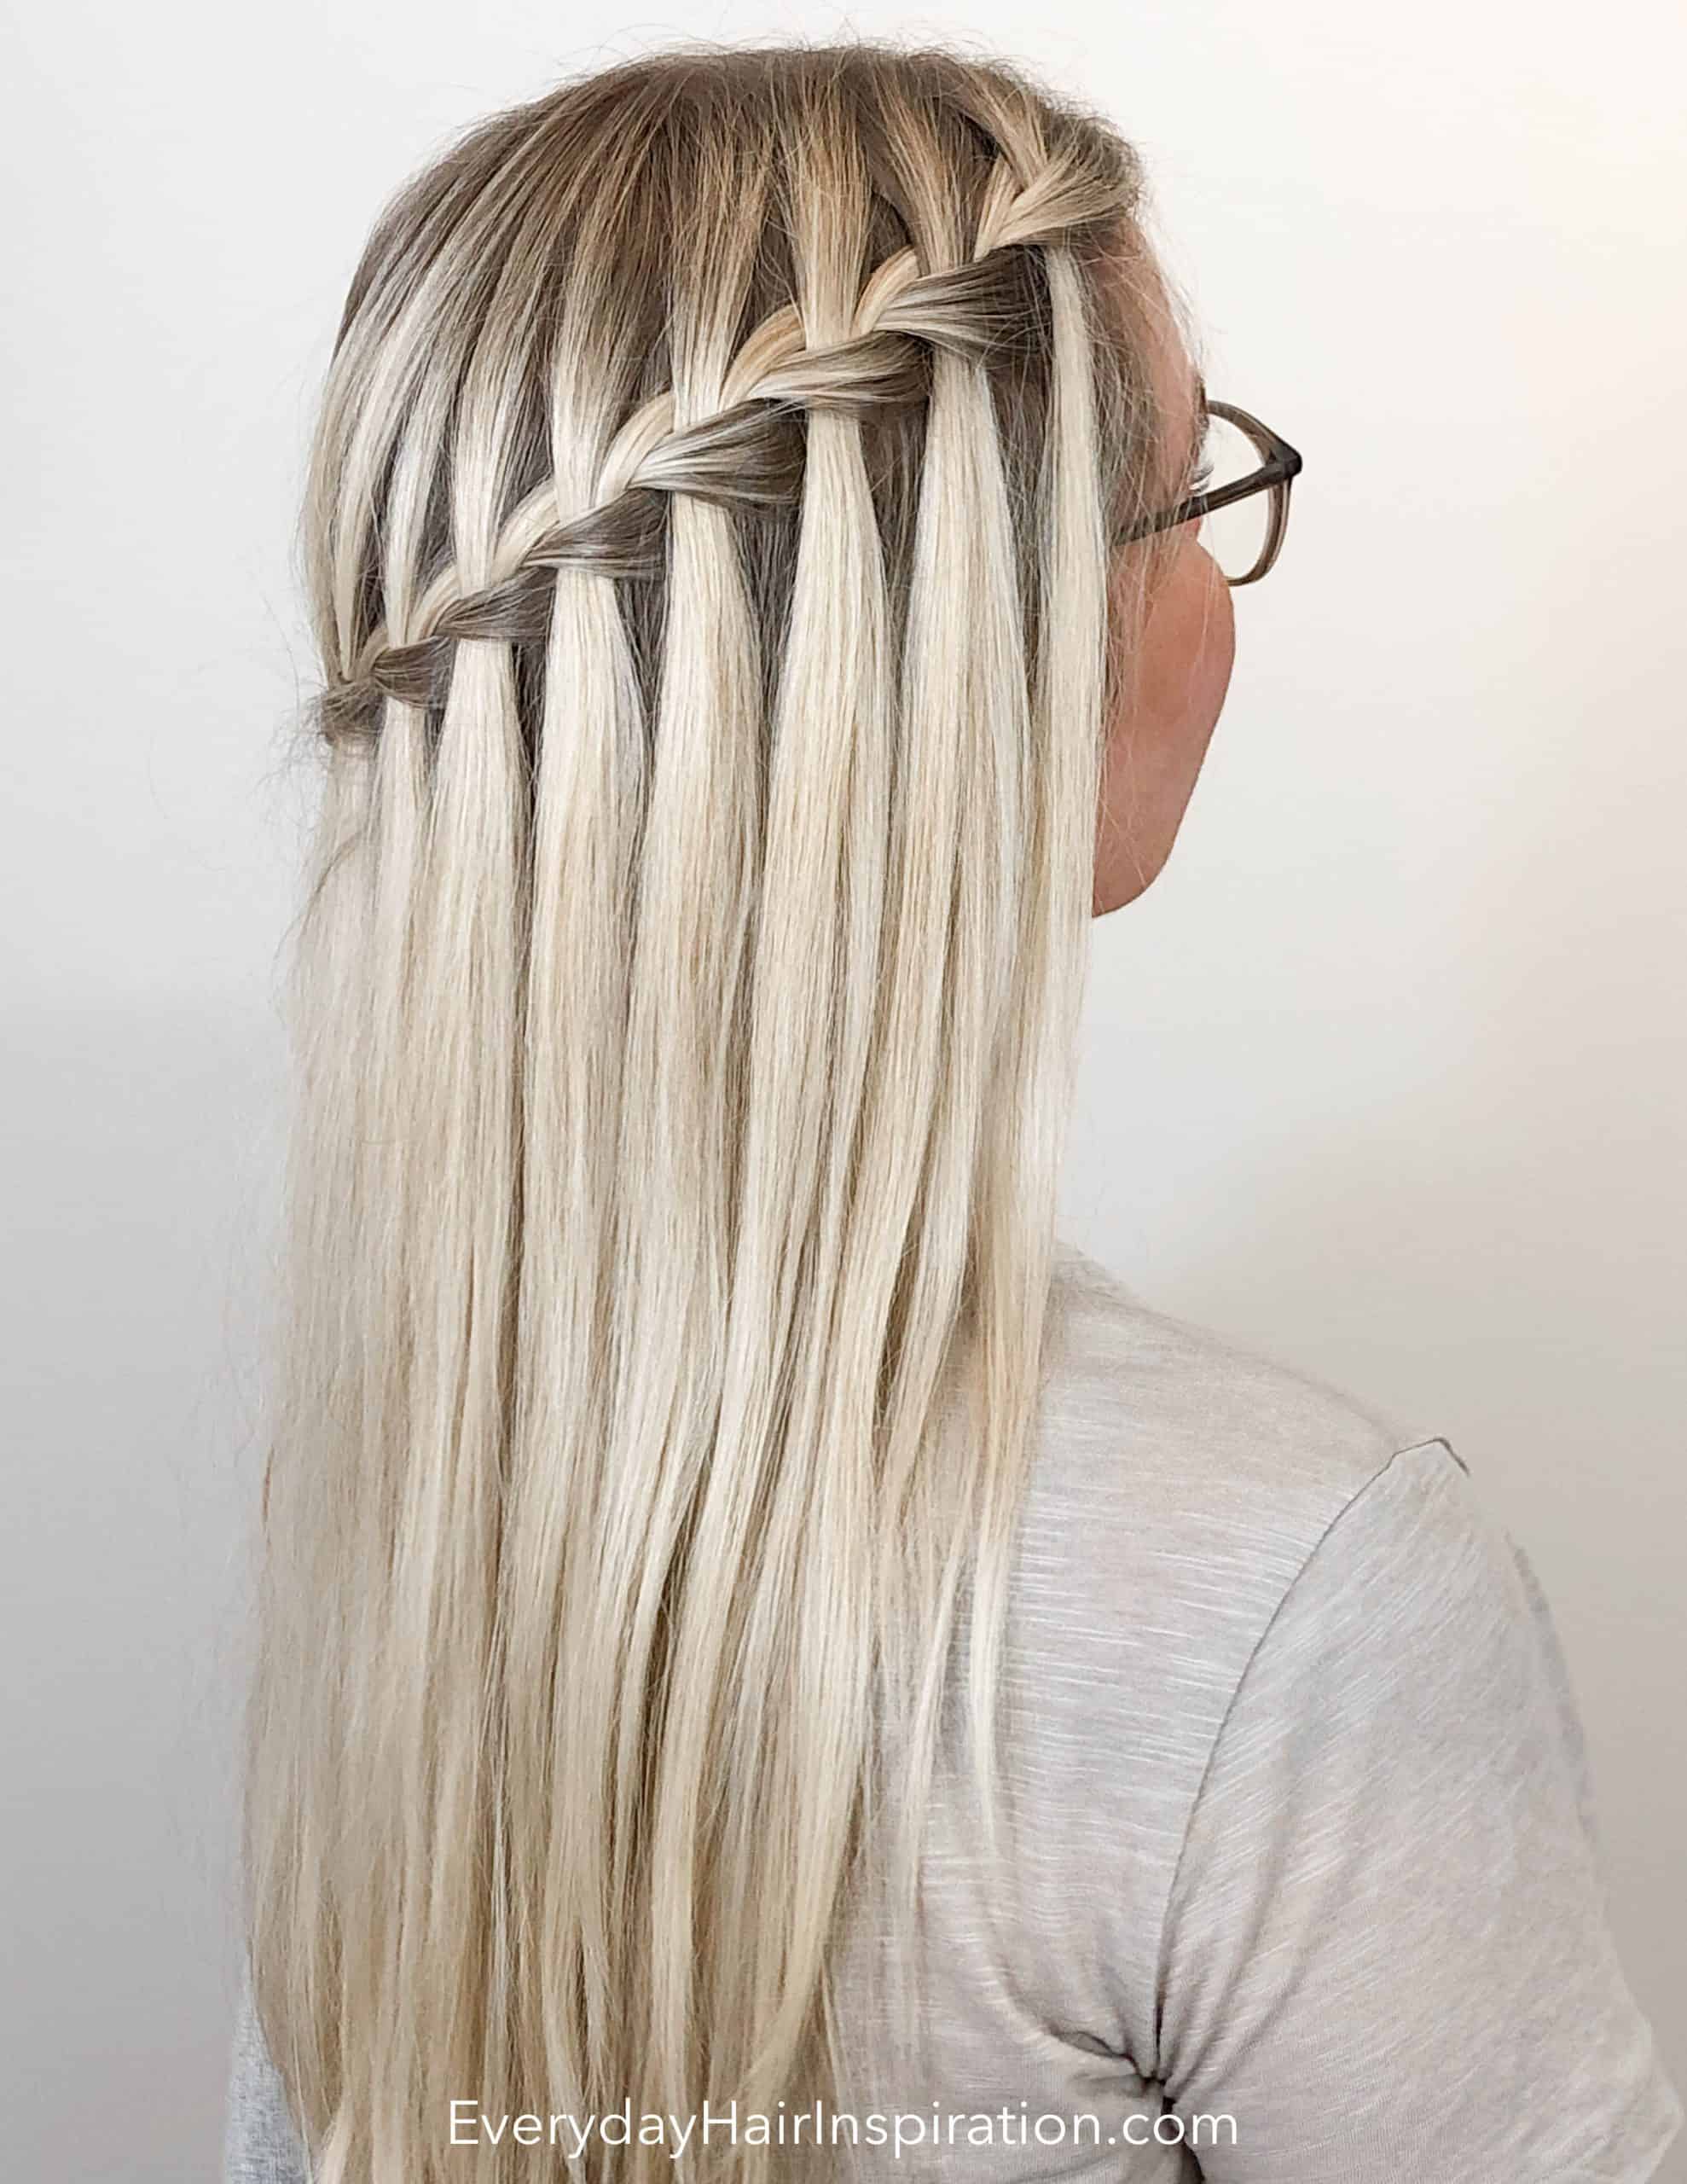 Waterfall braids hairstyle for female | HairstyleAI